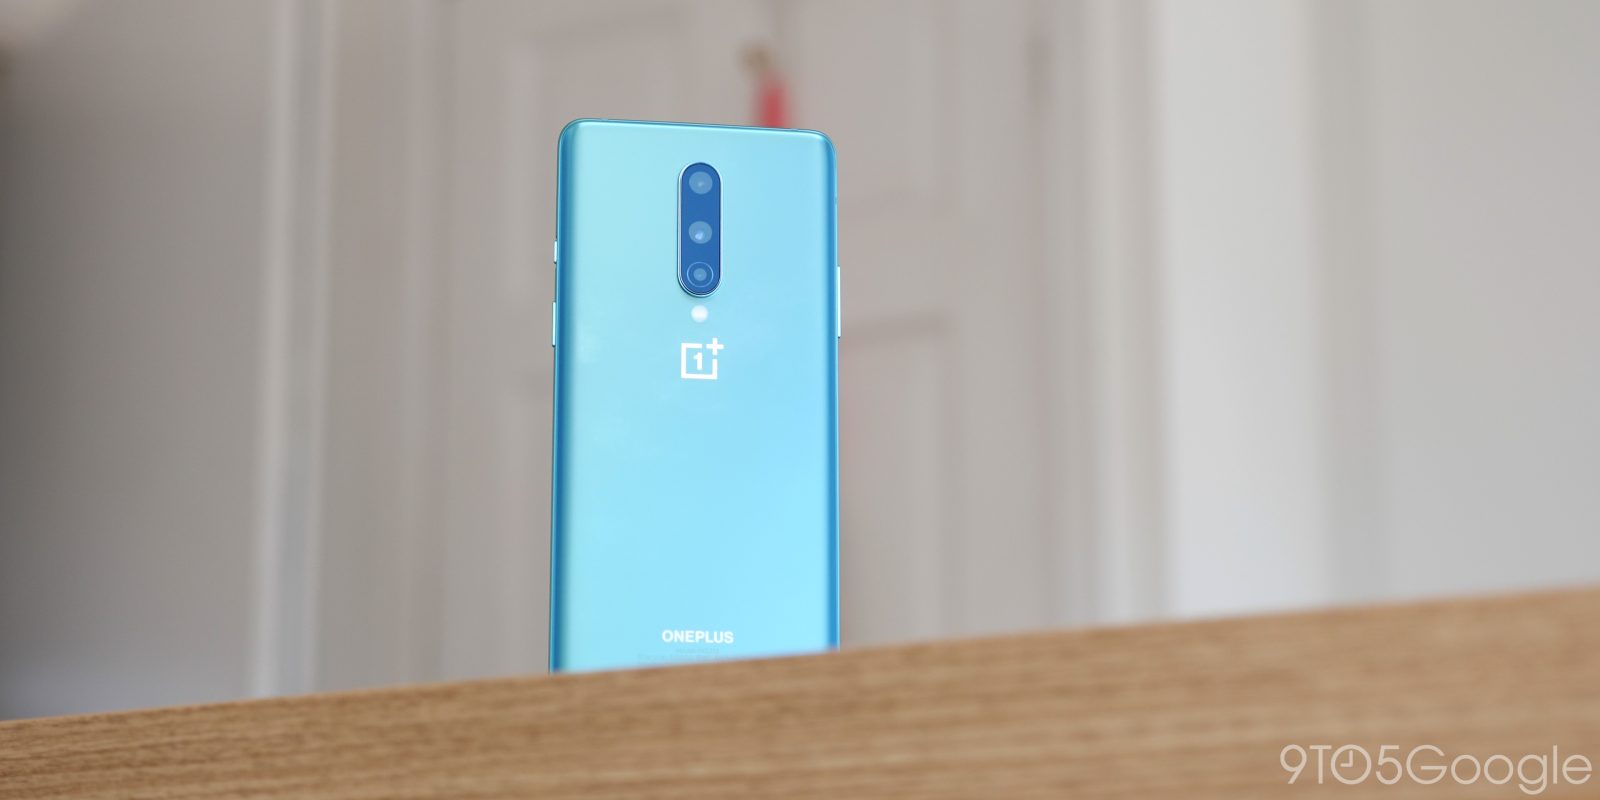 Android 11 Beta Now Available For Oneplus 8 And 8 Pro 9to5google